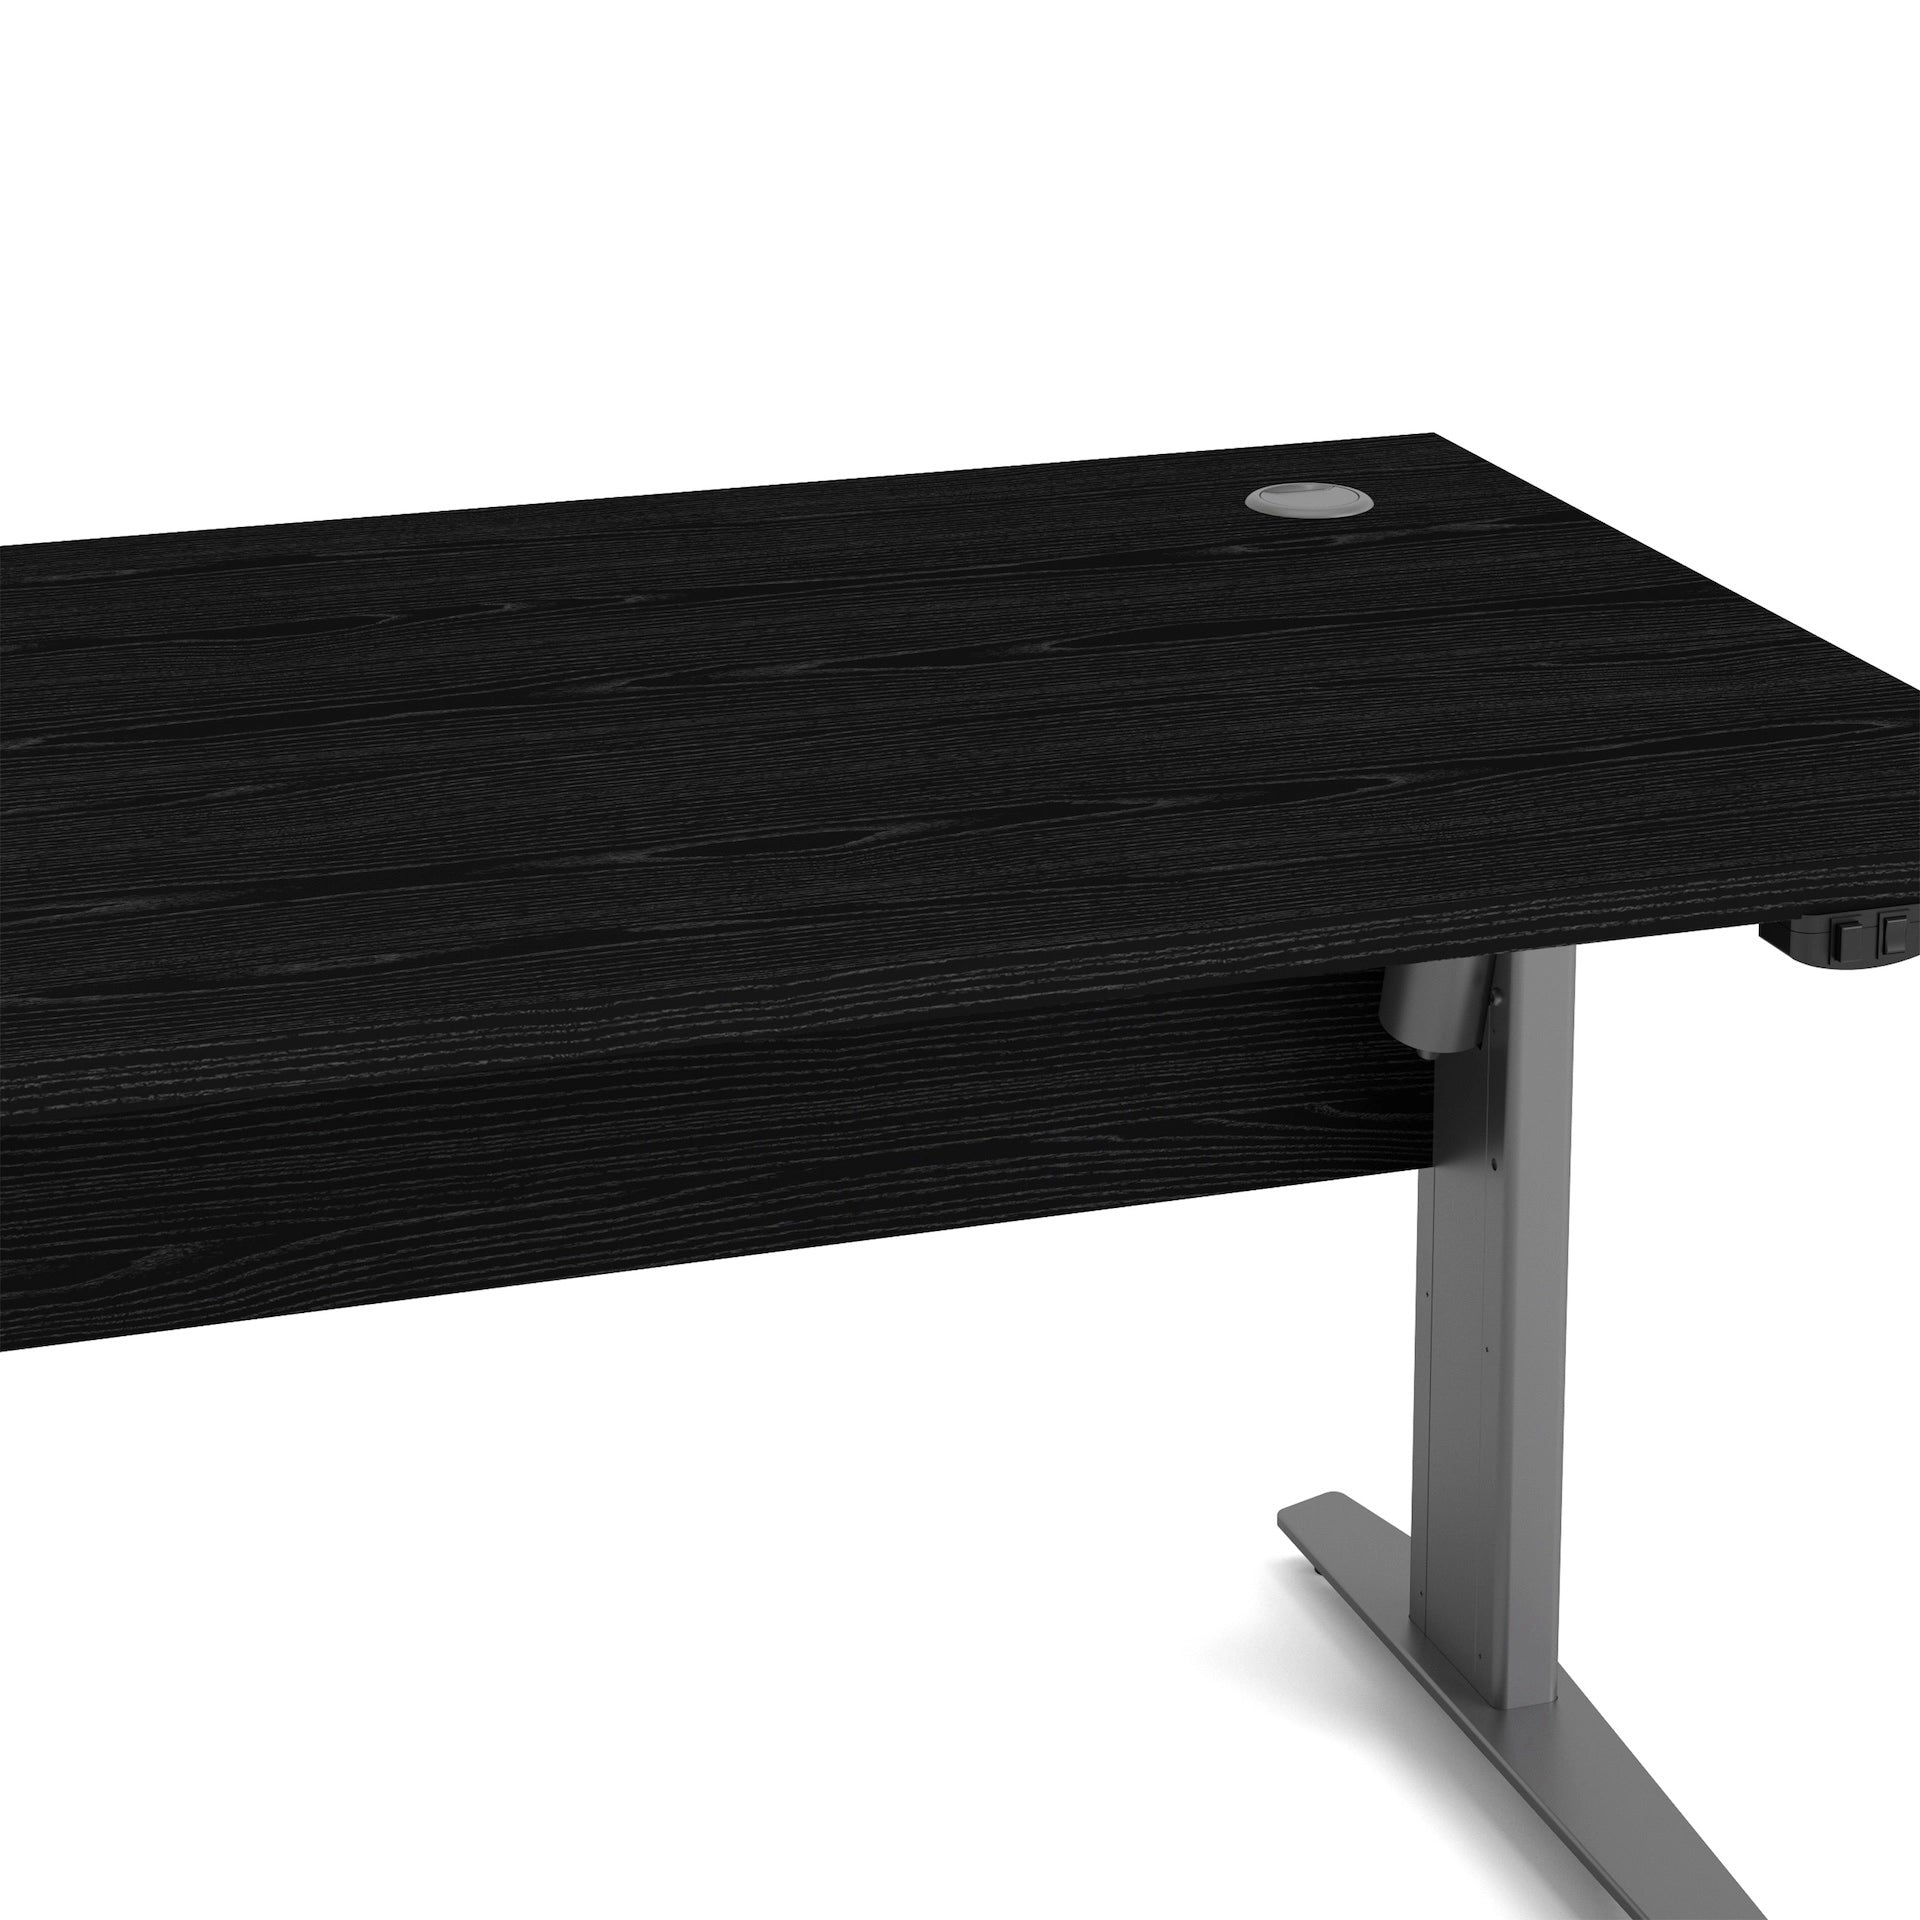 Furniture To Go Prima Desk 150cm in Black Woodgrain with Height Adjustable Legs with Electric Control in Silver Grey Steel